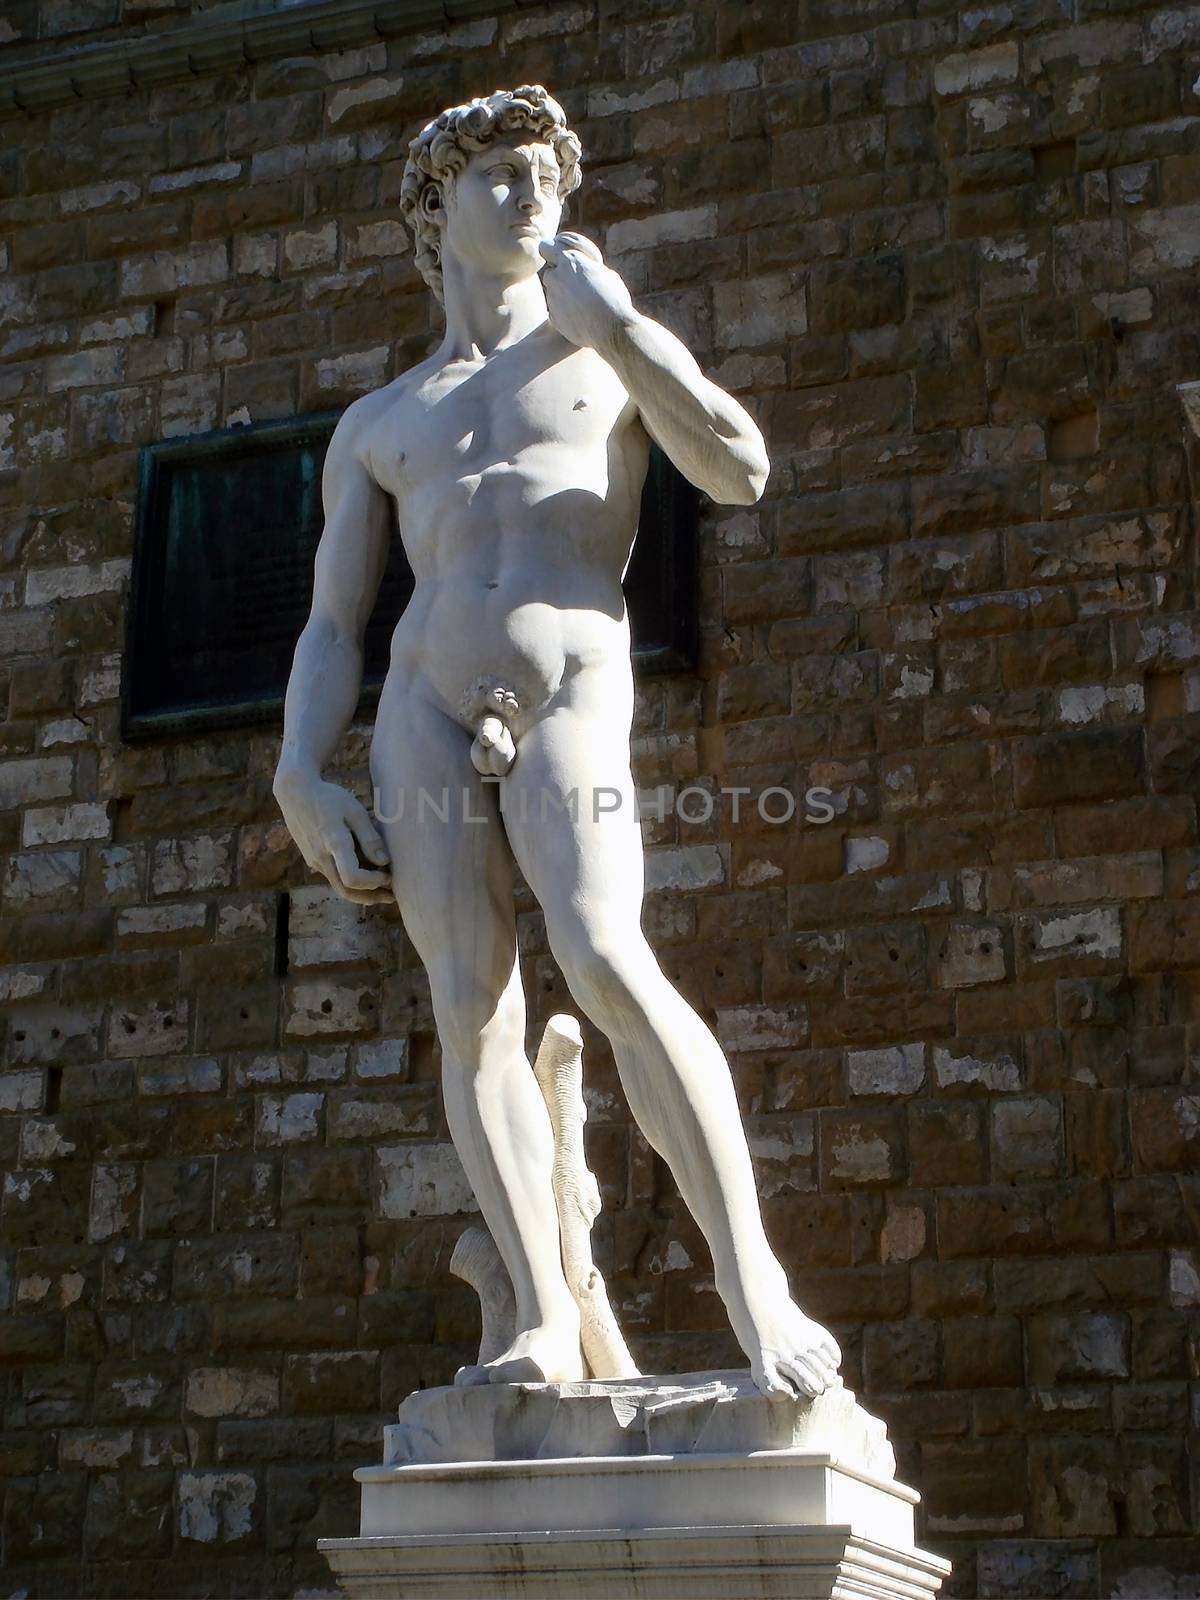 Sculpture copy of the famous David by Michelangelo in Piazza della Signoria , sunlit on stone wall background, Florence, Tuscany, Italy, Europe